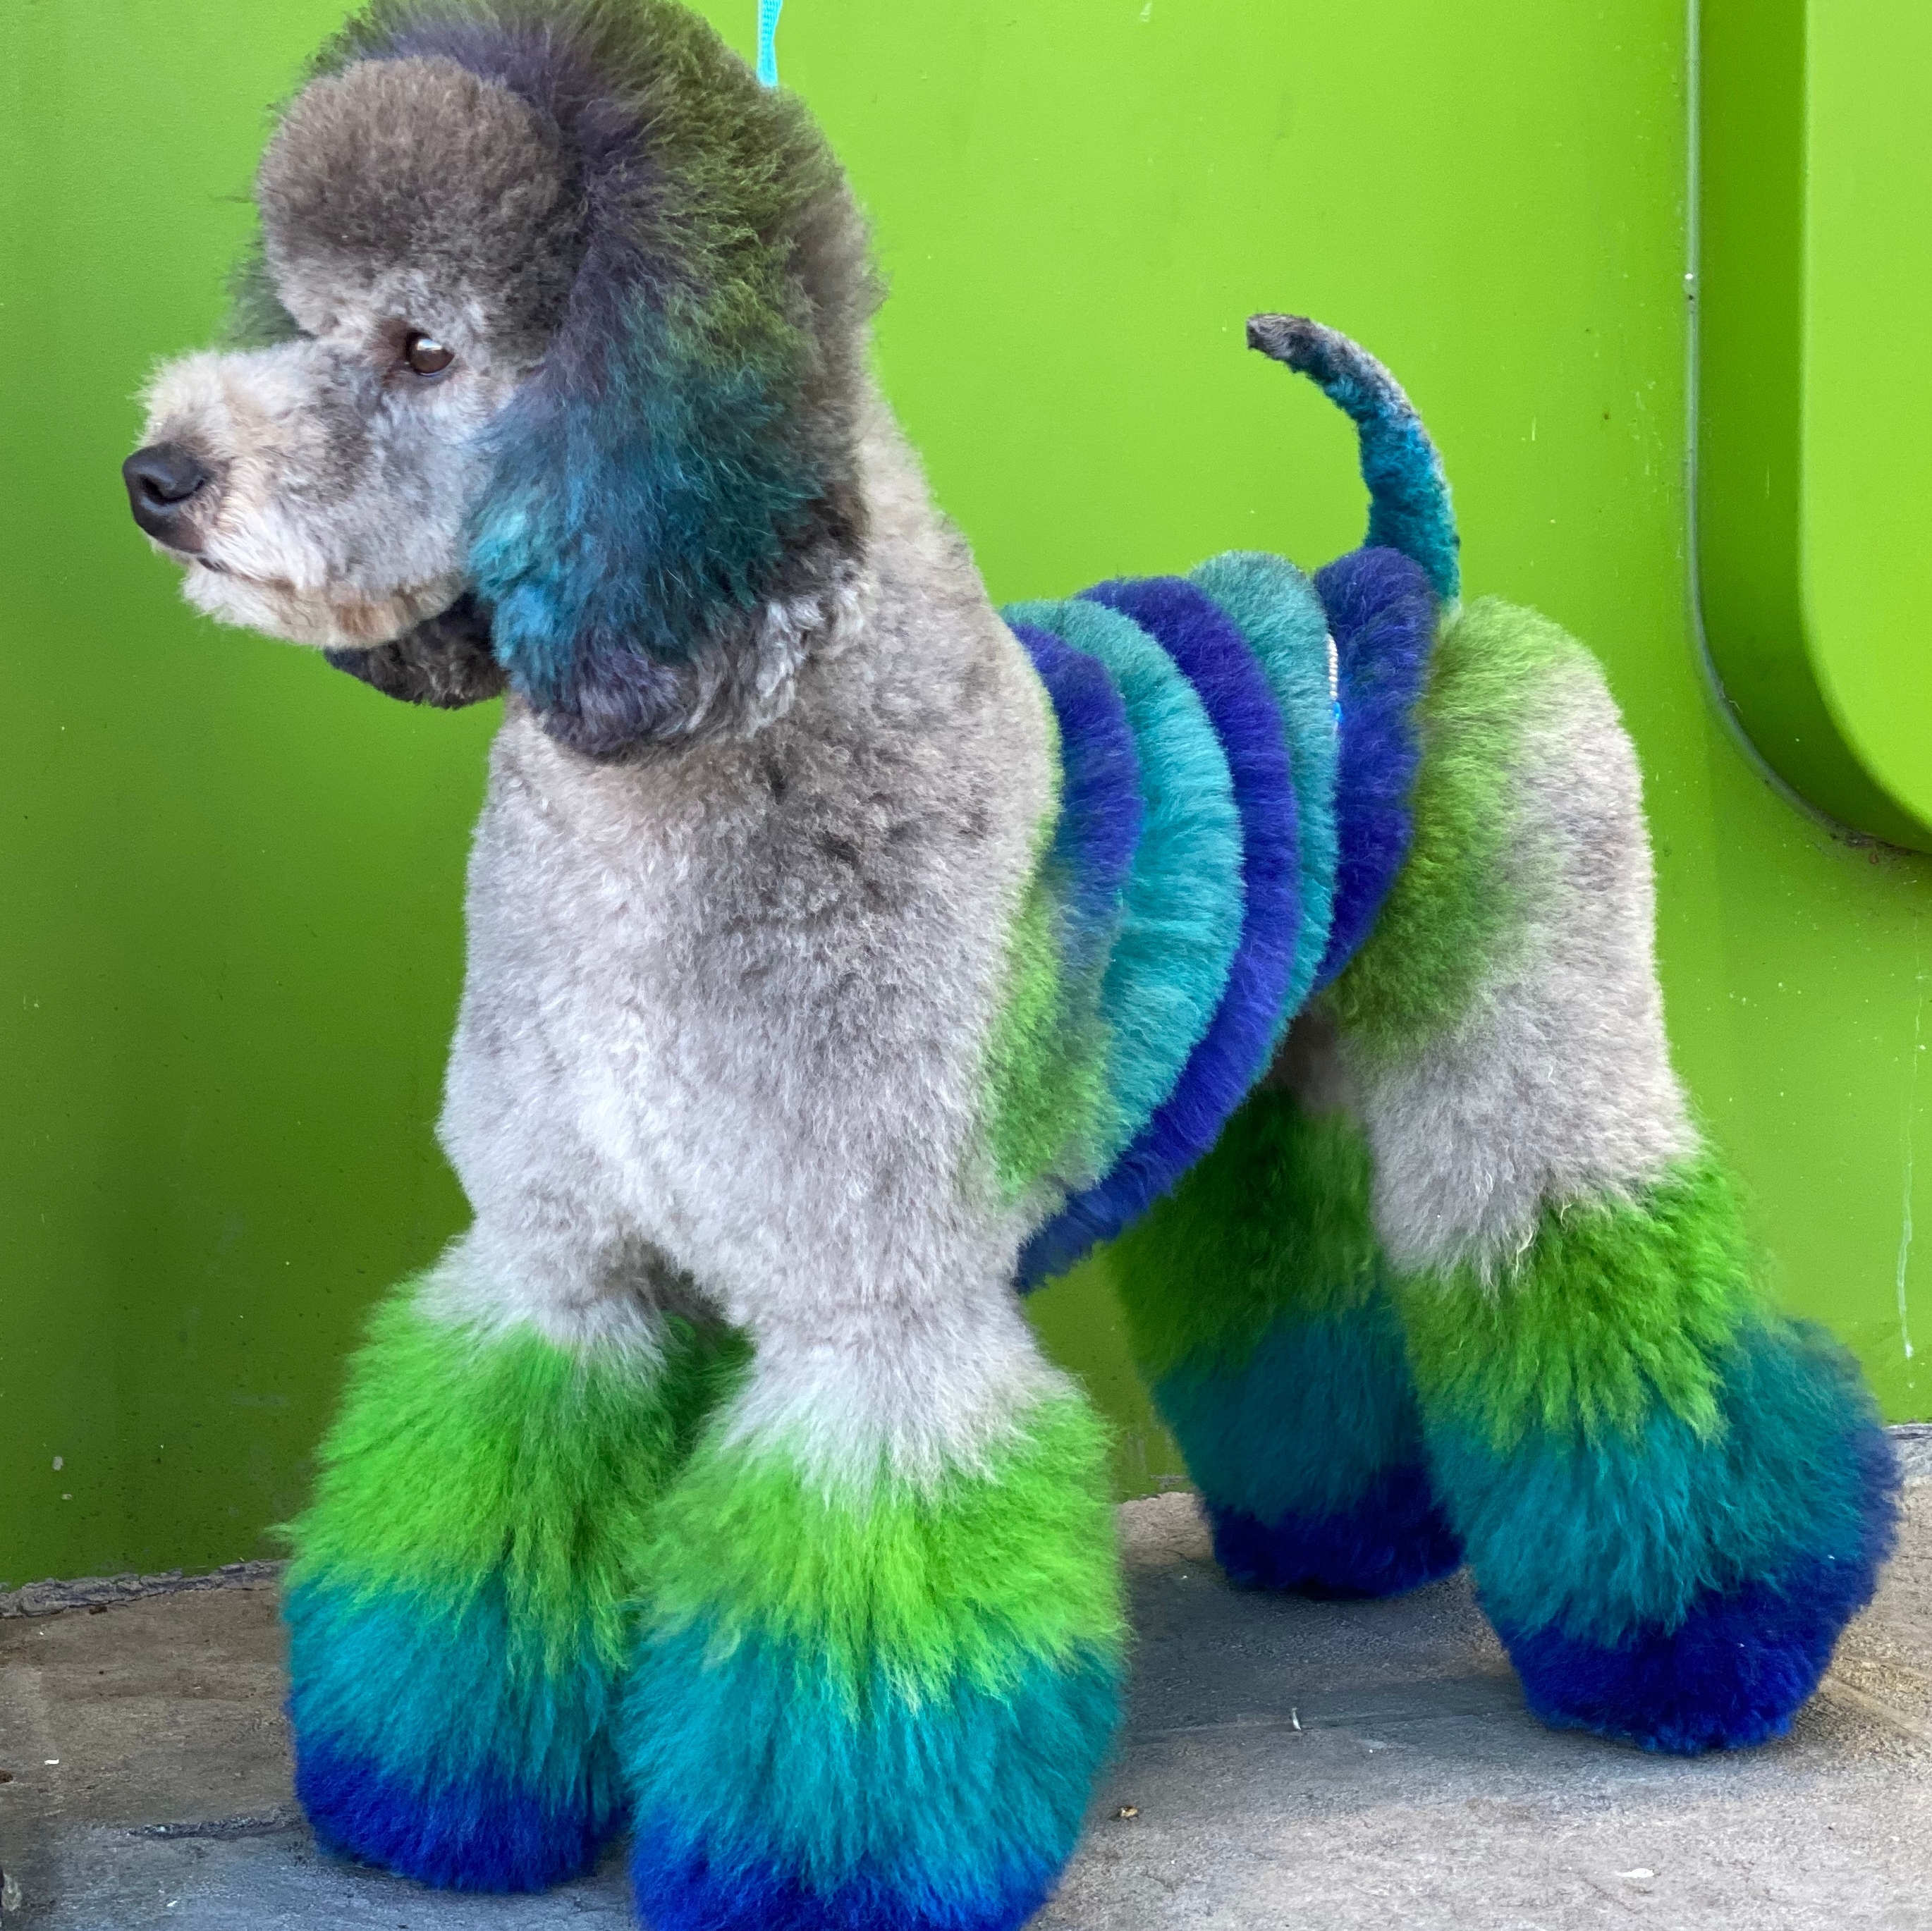 Silver poodle featuring a spiral design with blue and green colorful accents on paws and waist.